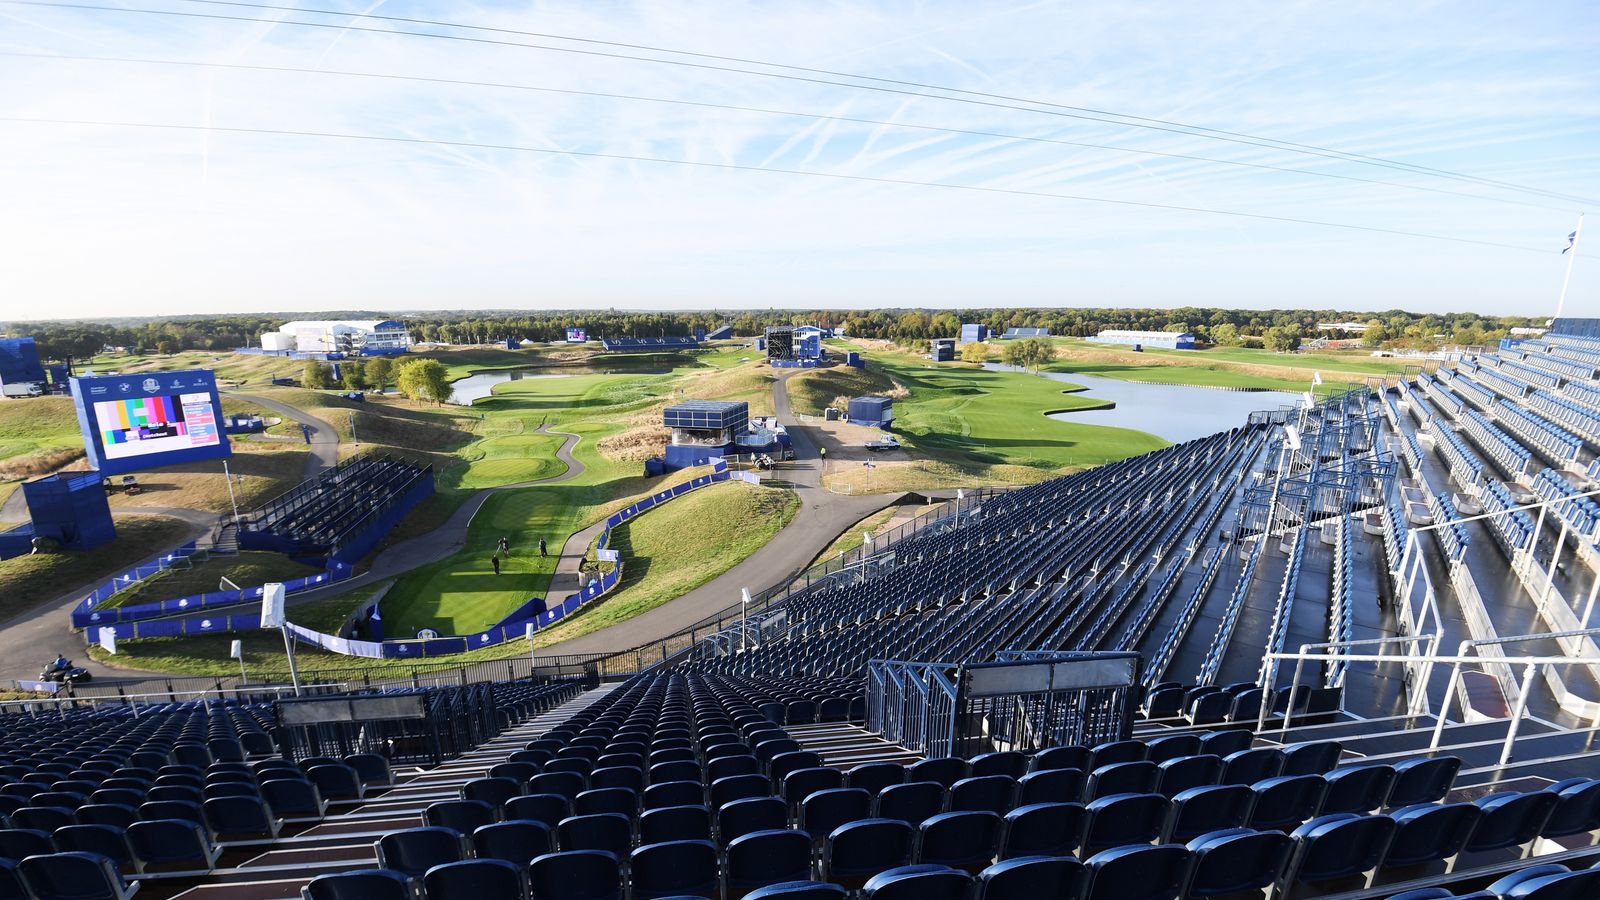 Ryder Cup Firsttee grandstand will provide great spectacle, says Paul